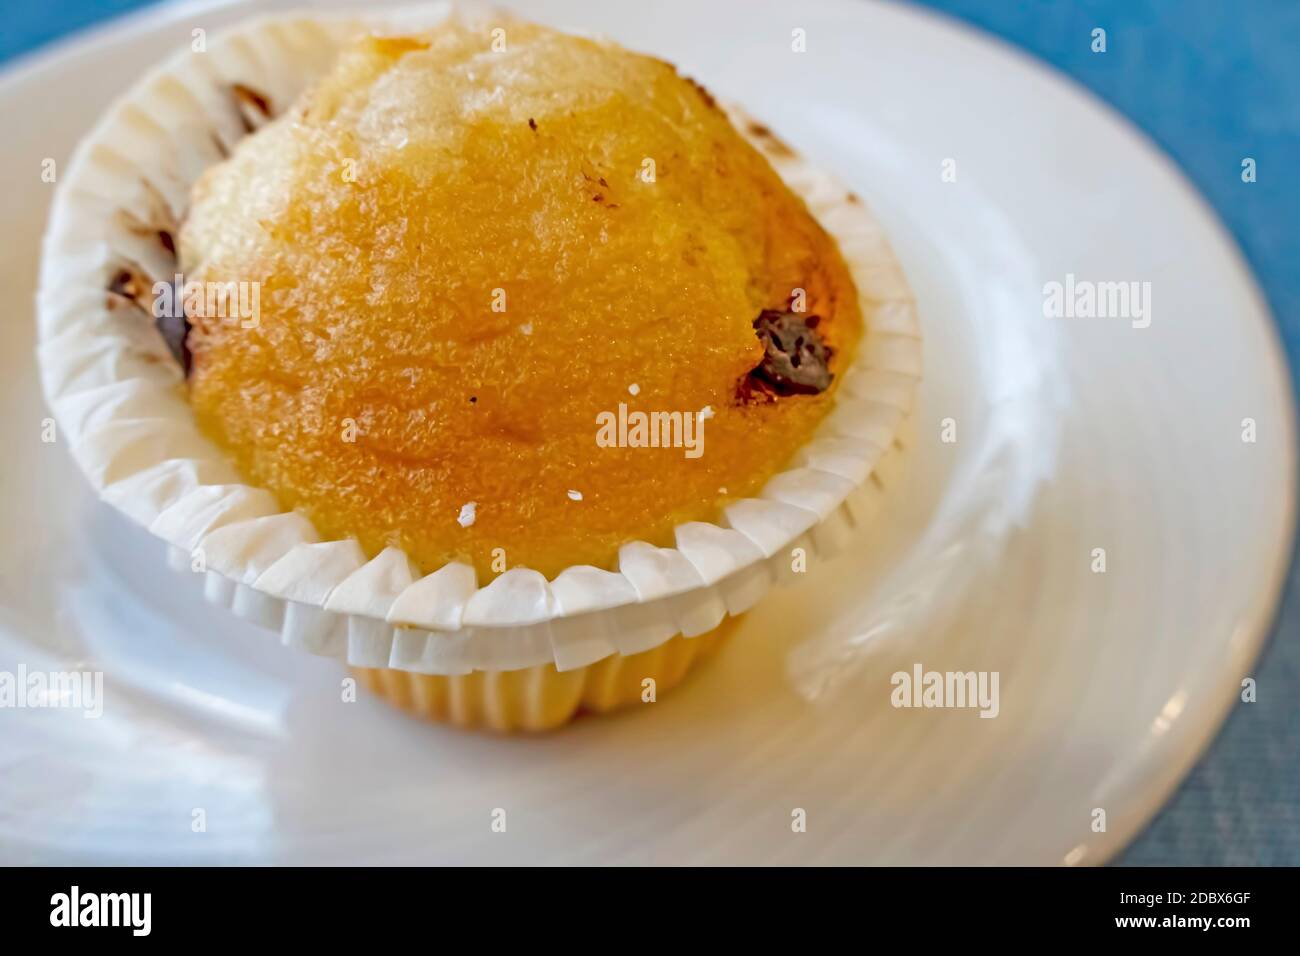 close up ready to eat muffin on aplate Stock Photo